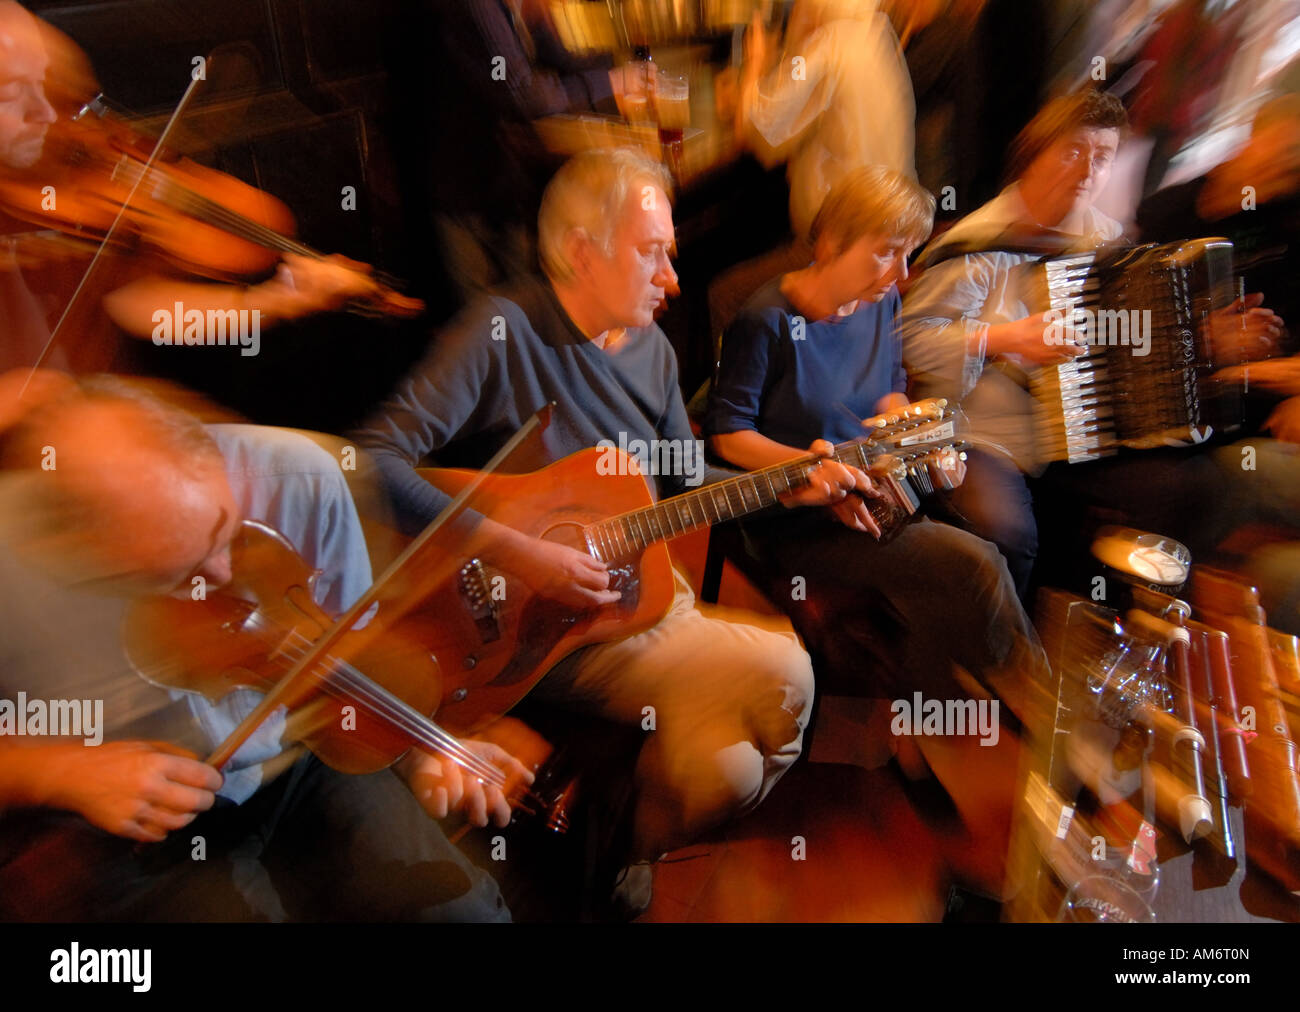 A group of folk musicians performing during an open session at the Sandy's Bell pub in Edinburgh Scotland Stock Photo